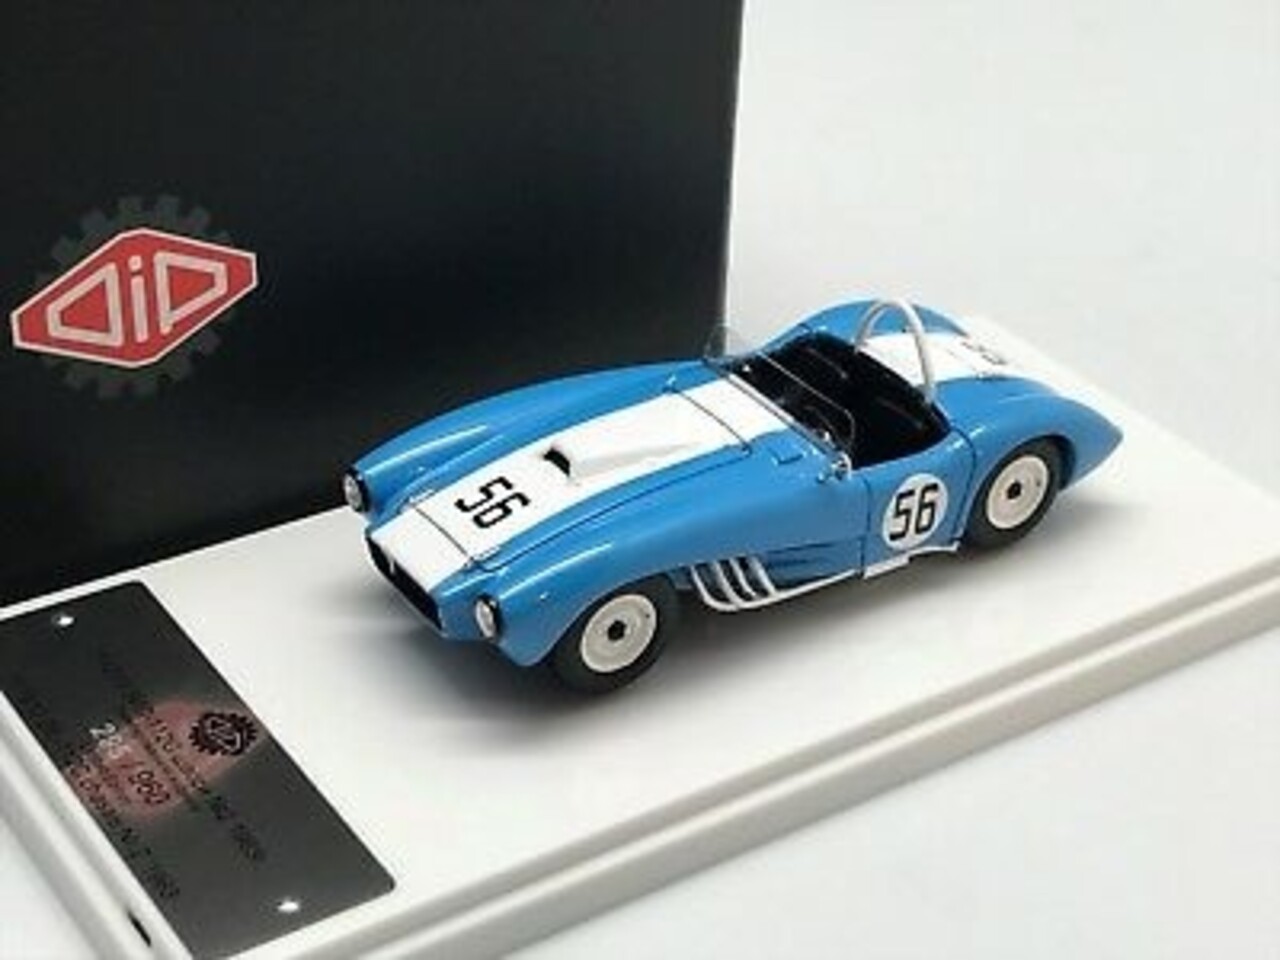 ZIL ZIL-112C Chassis Nr. 2 #56 1963 - 1:43 - DiP Models